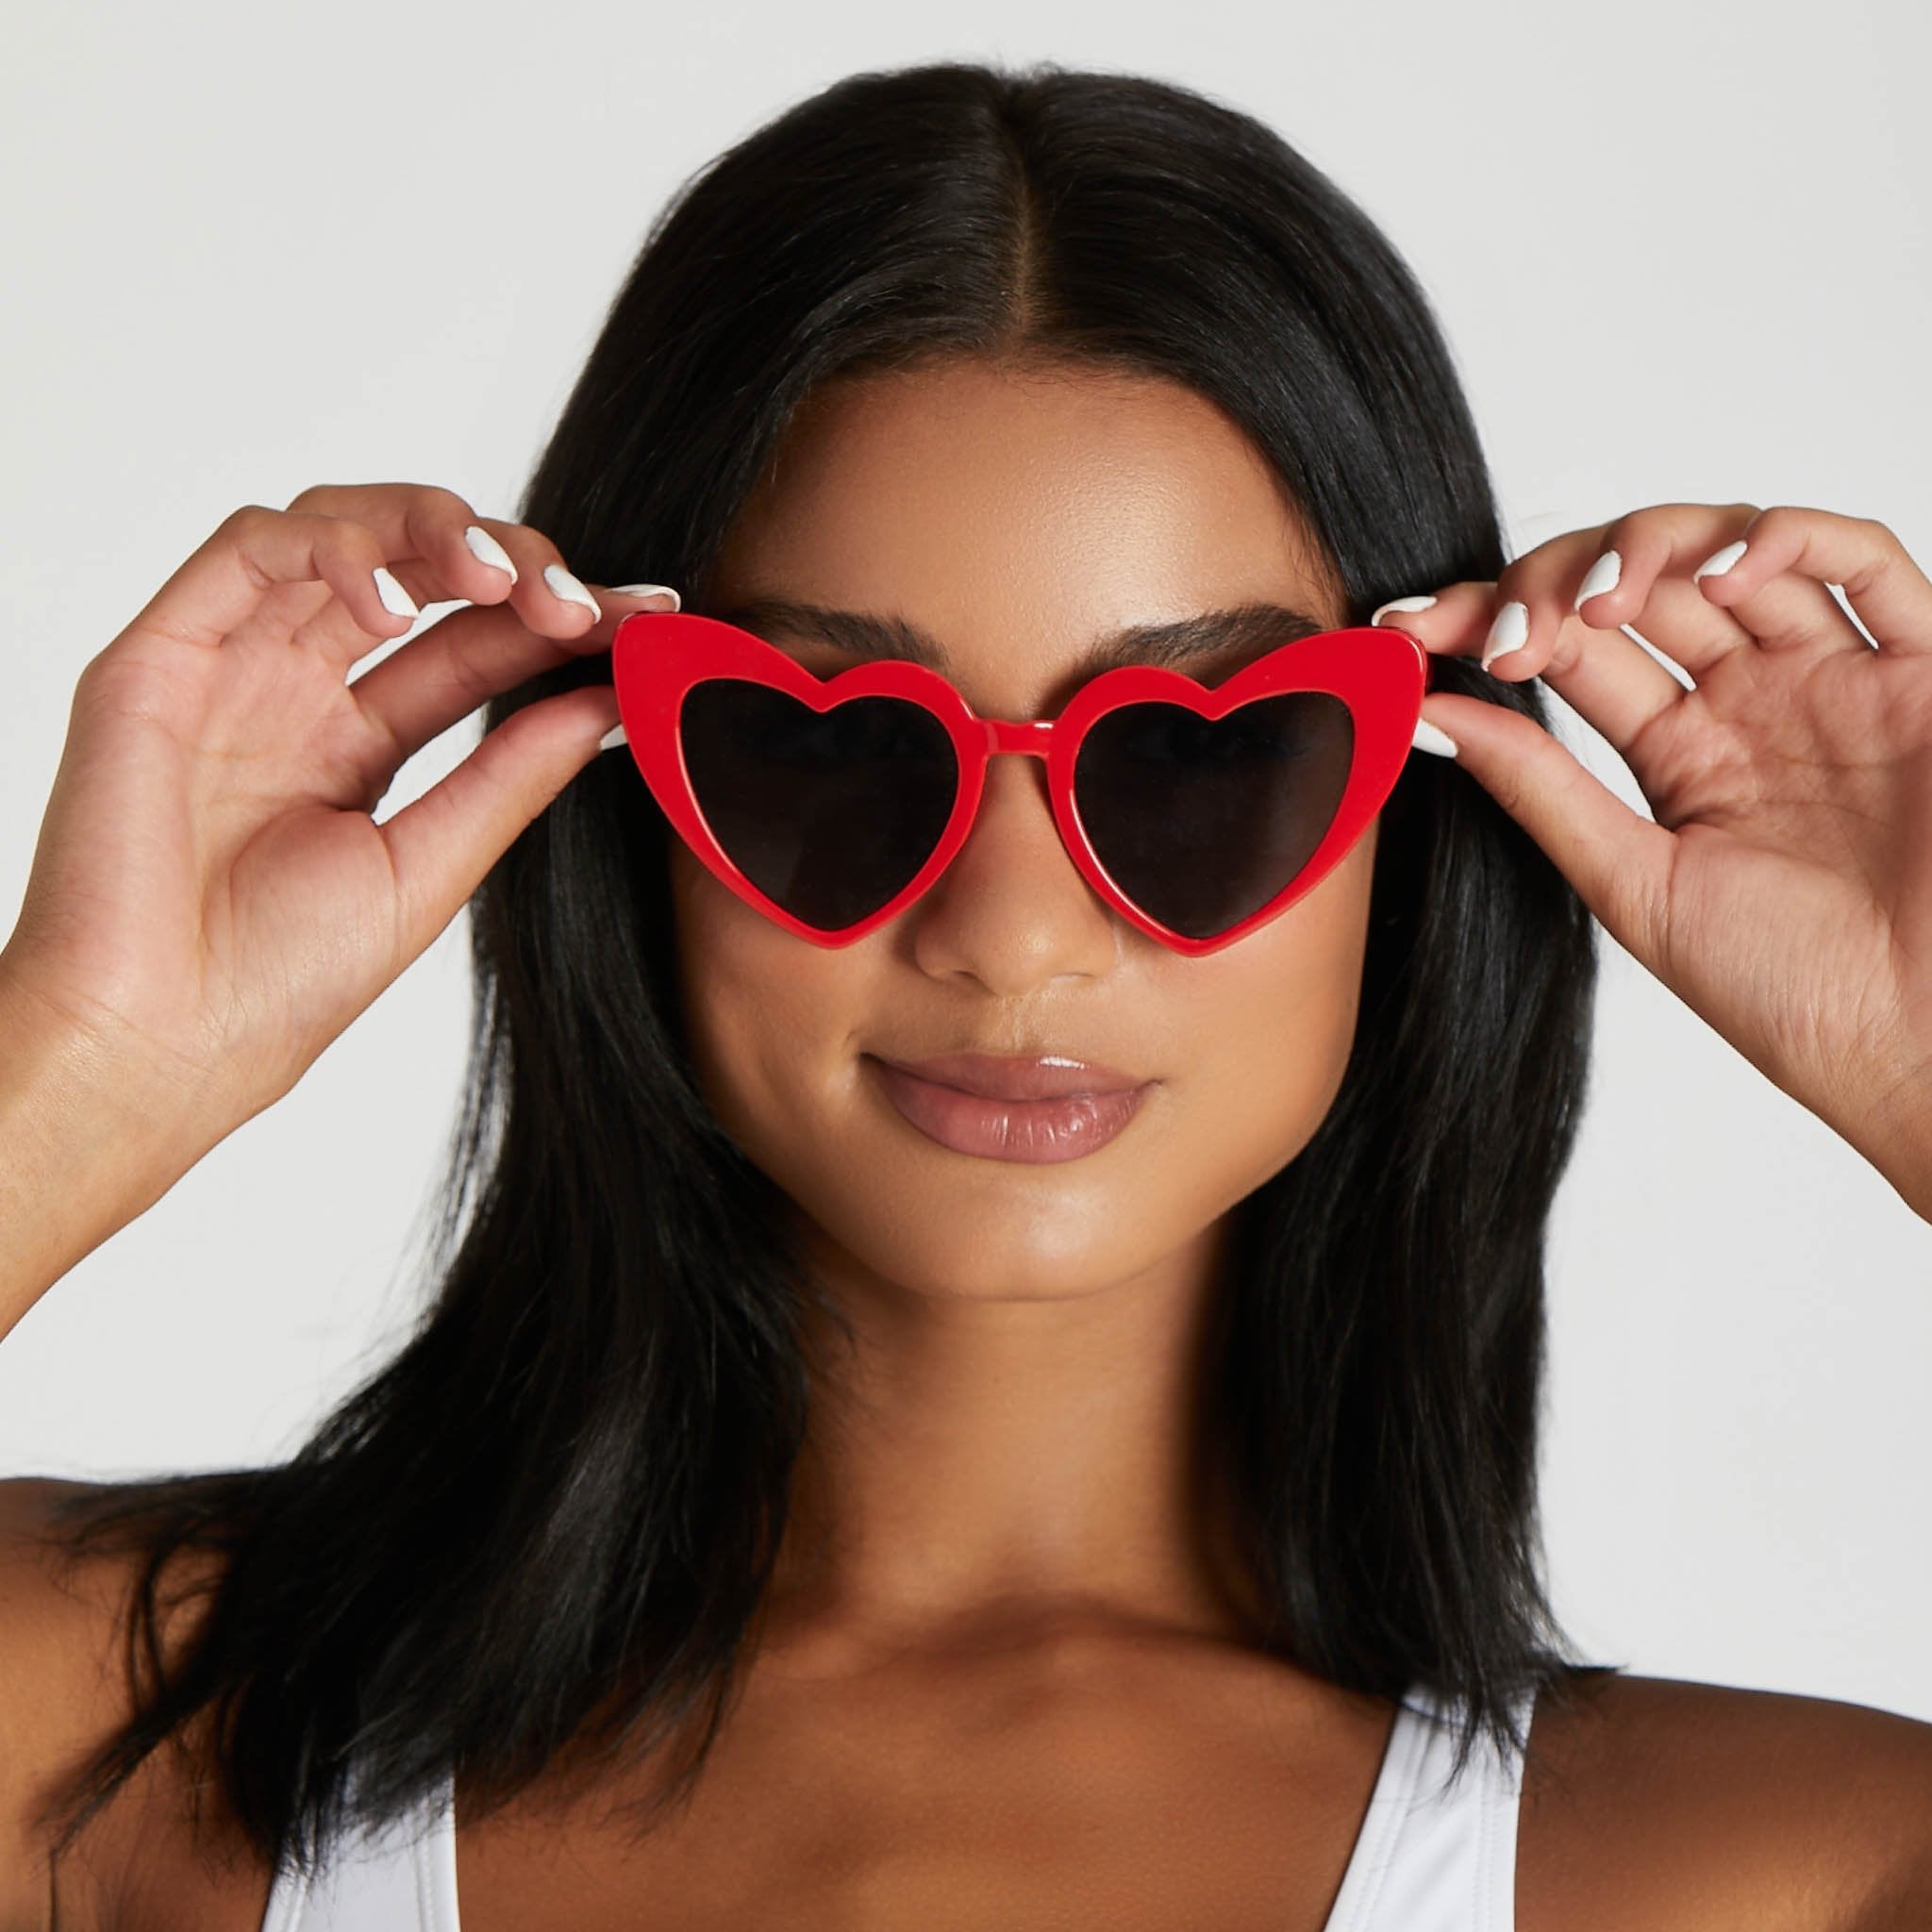 Heart sunglasses in red by Birdy Grey, front view